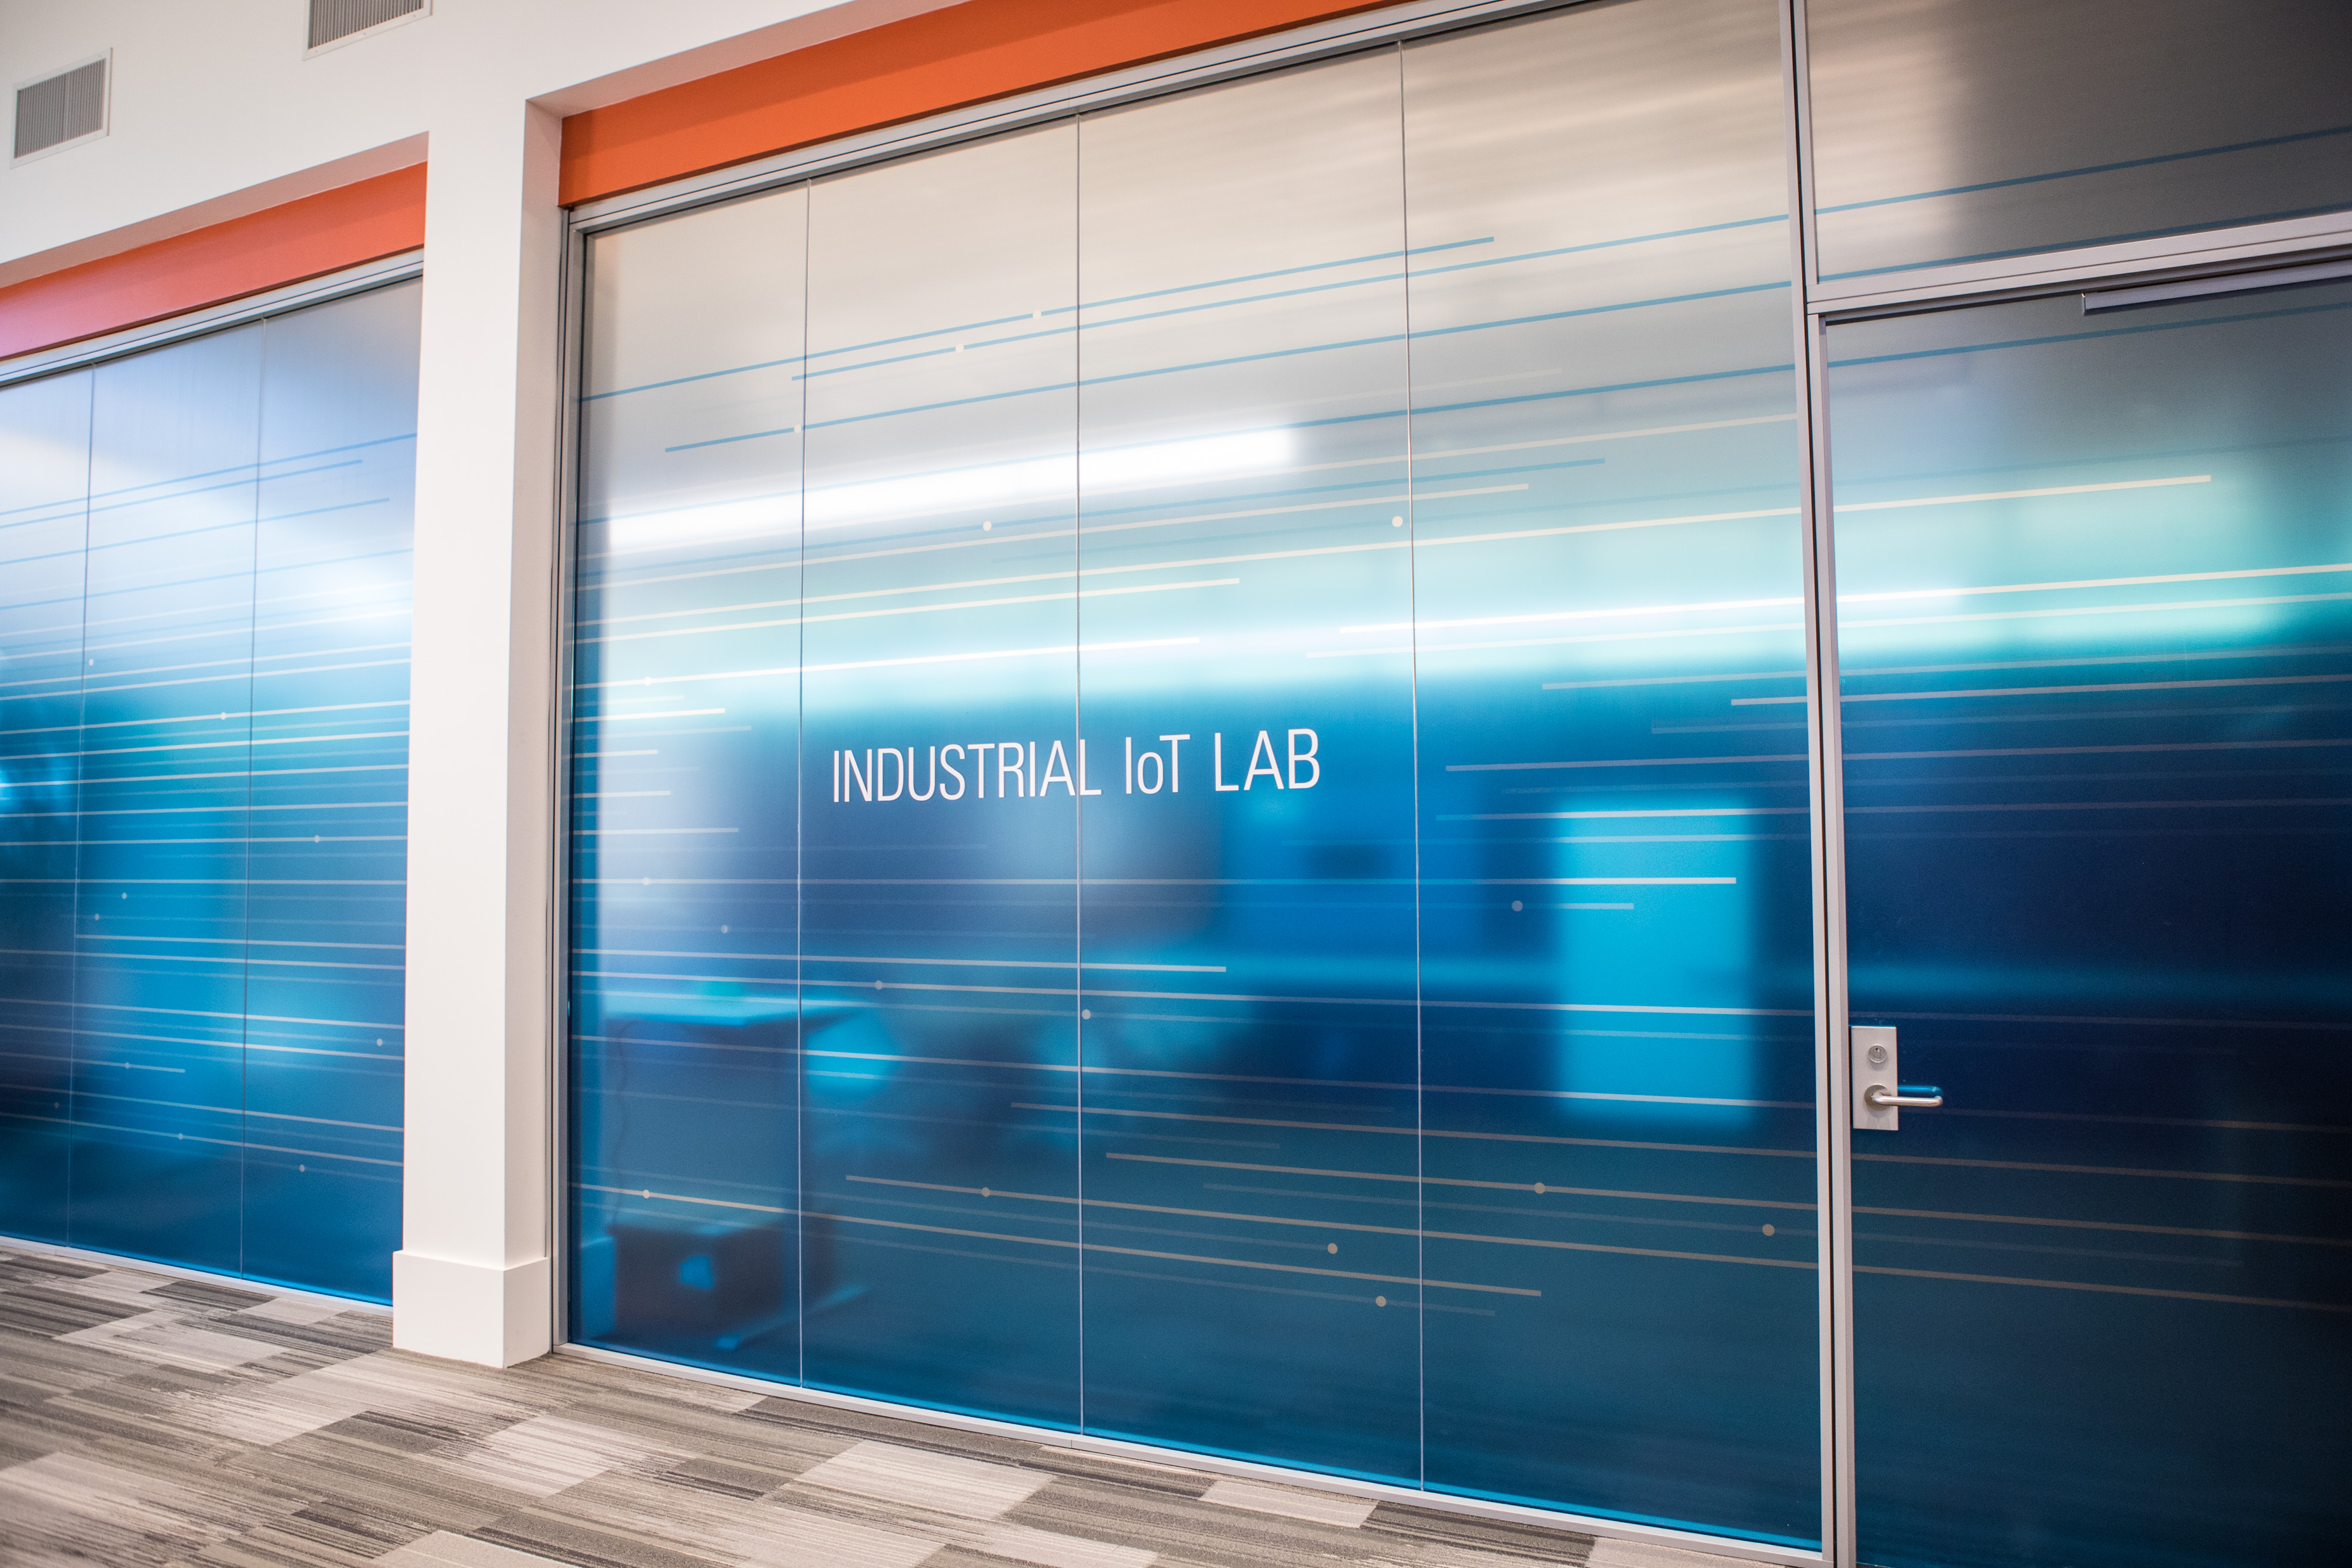 Industrial Internet of Things (IoT) Lab Opens